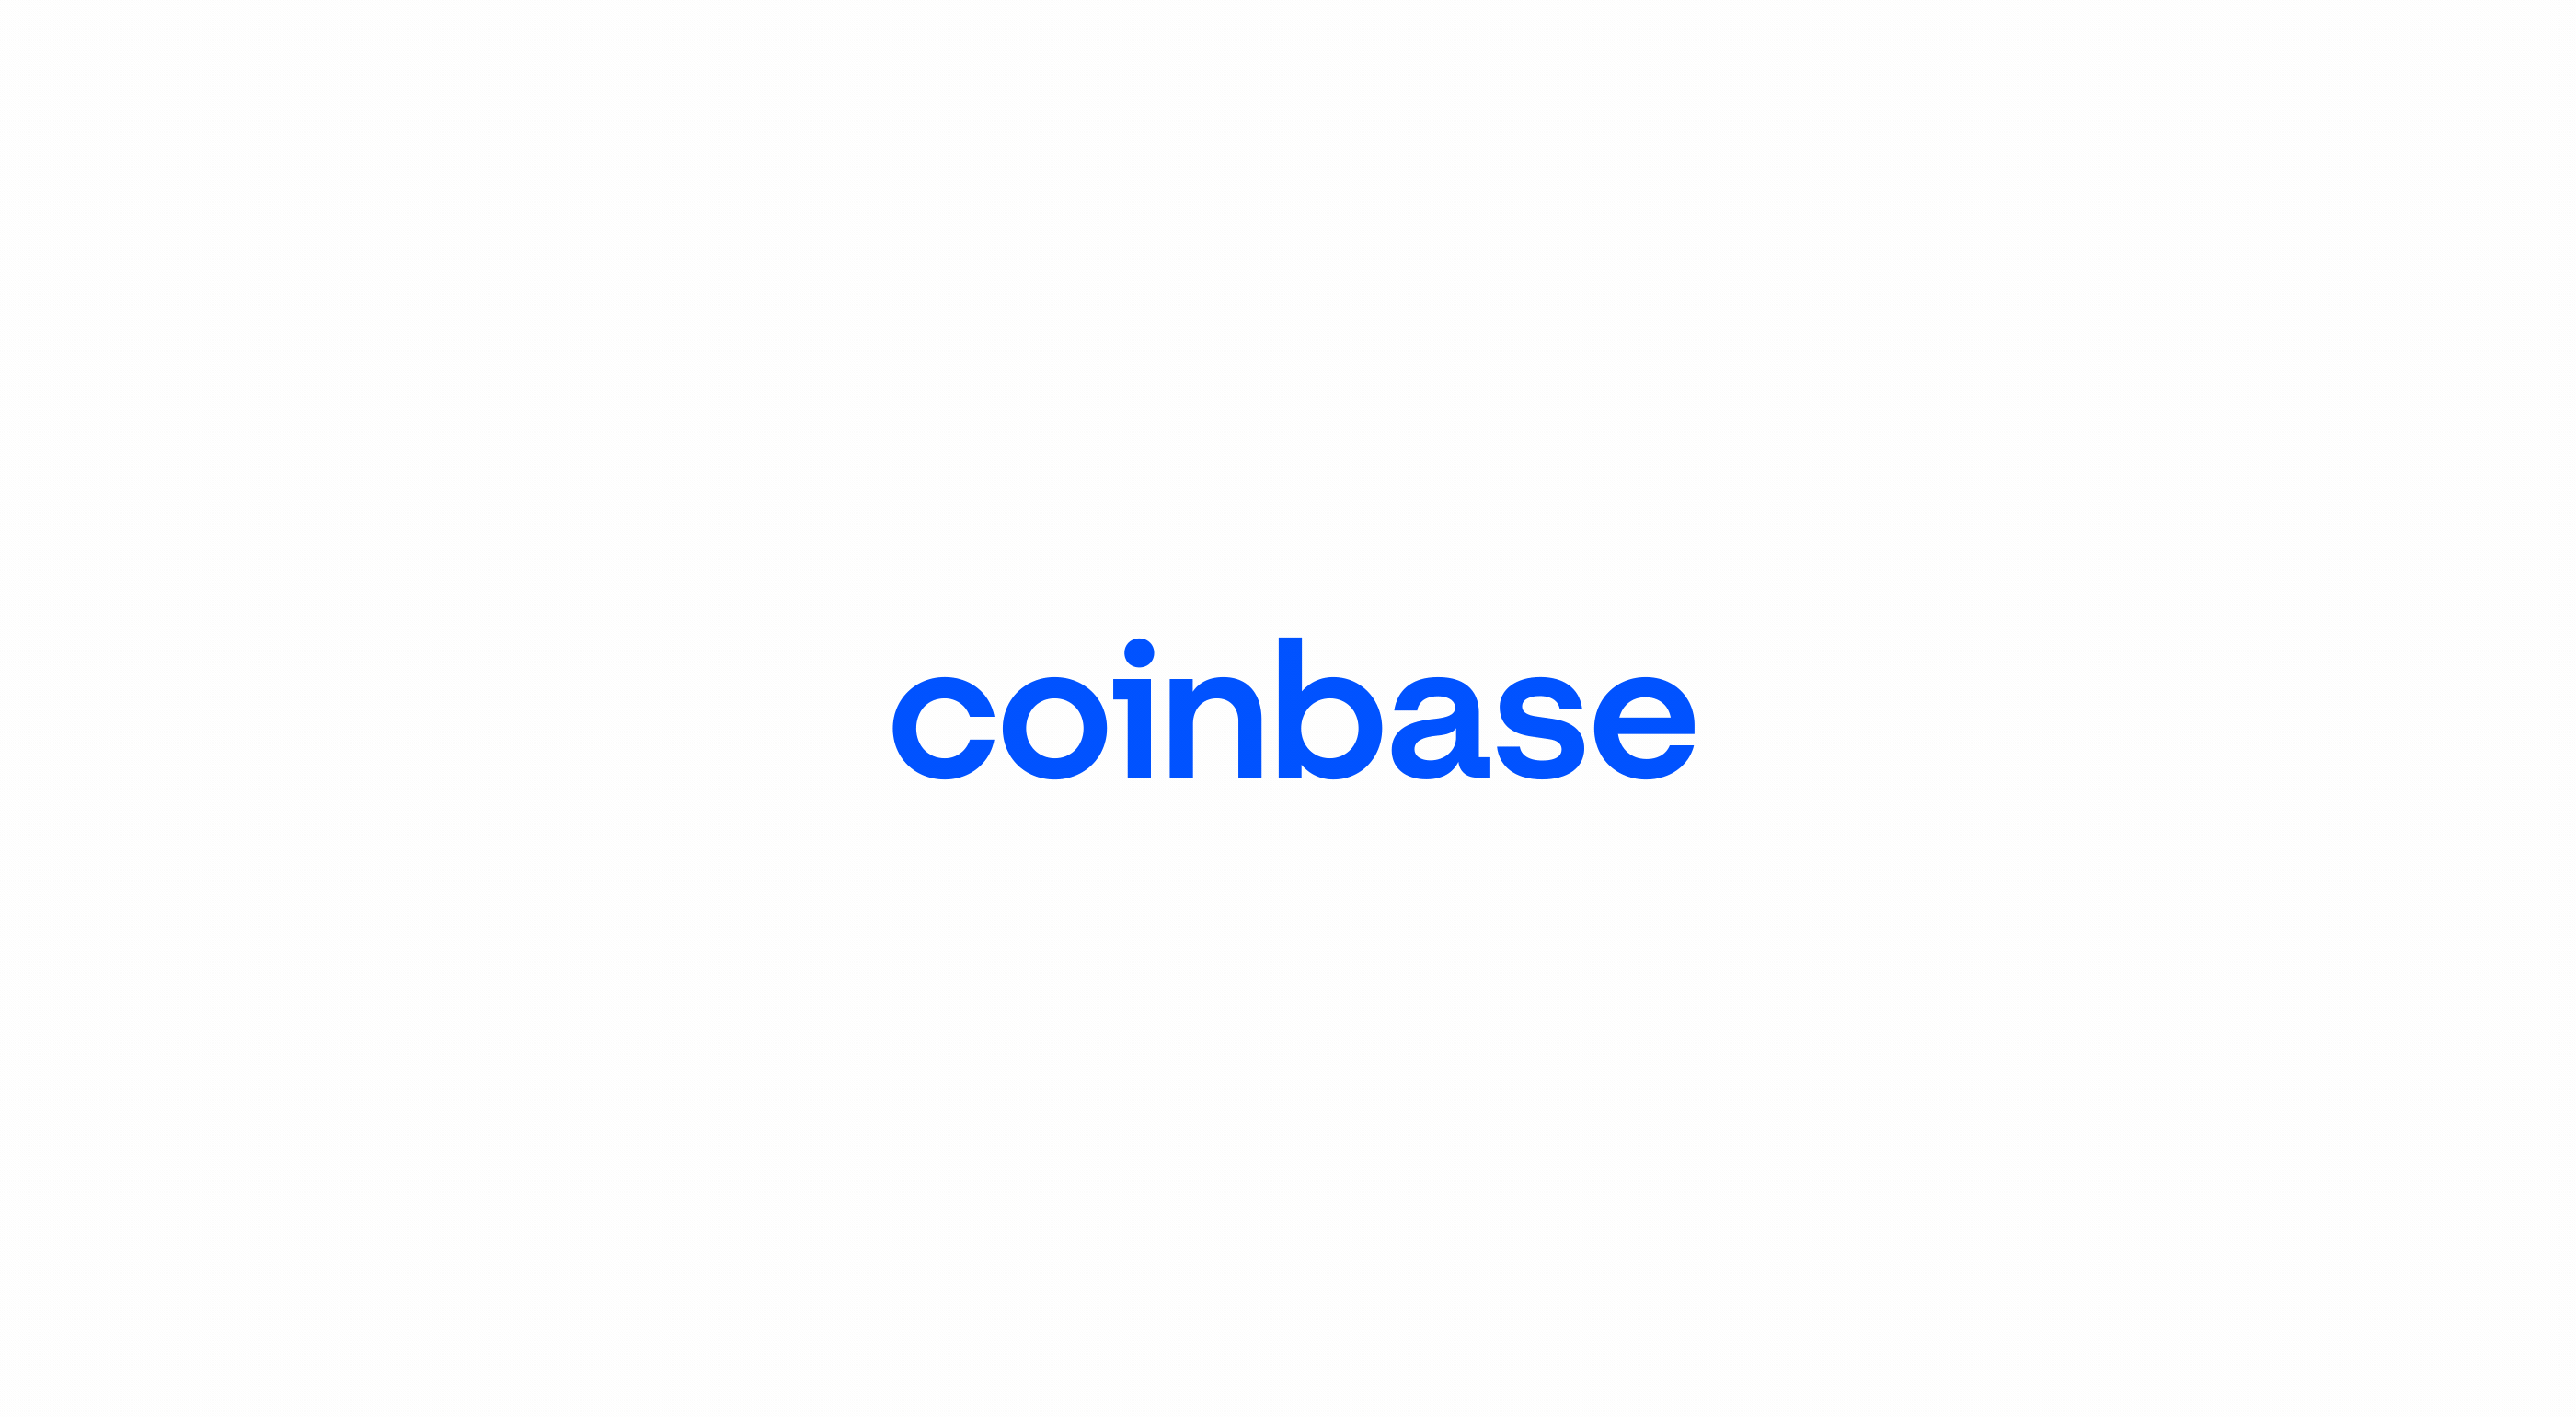 Improved clarity and guardrails for new assets on Coinbase